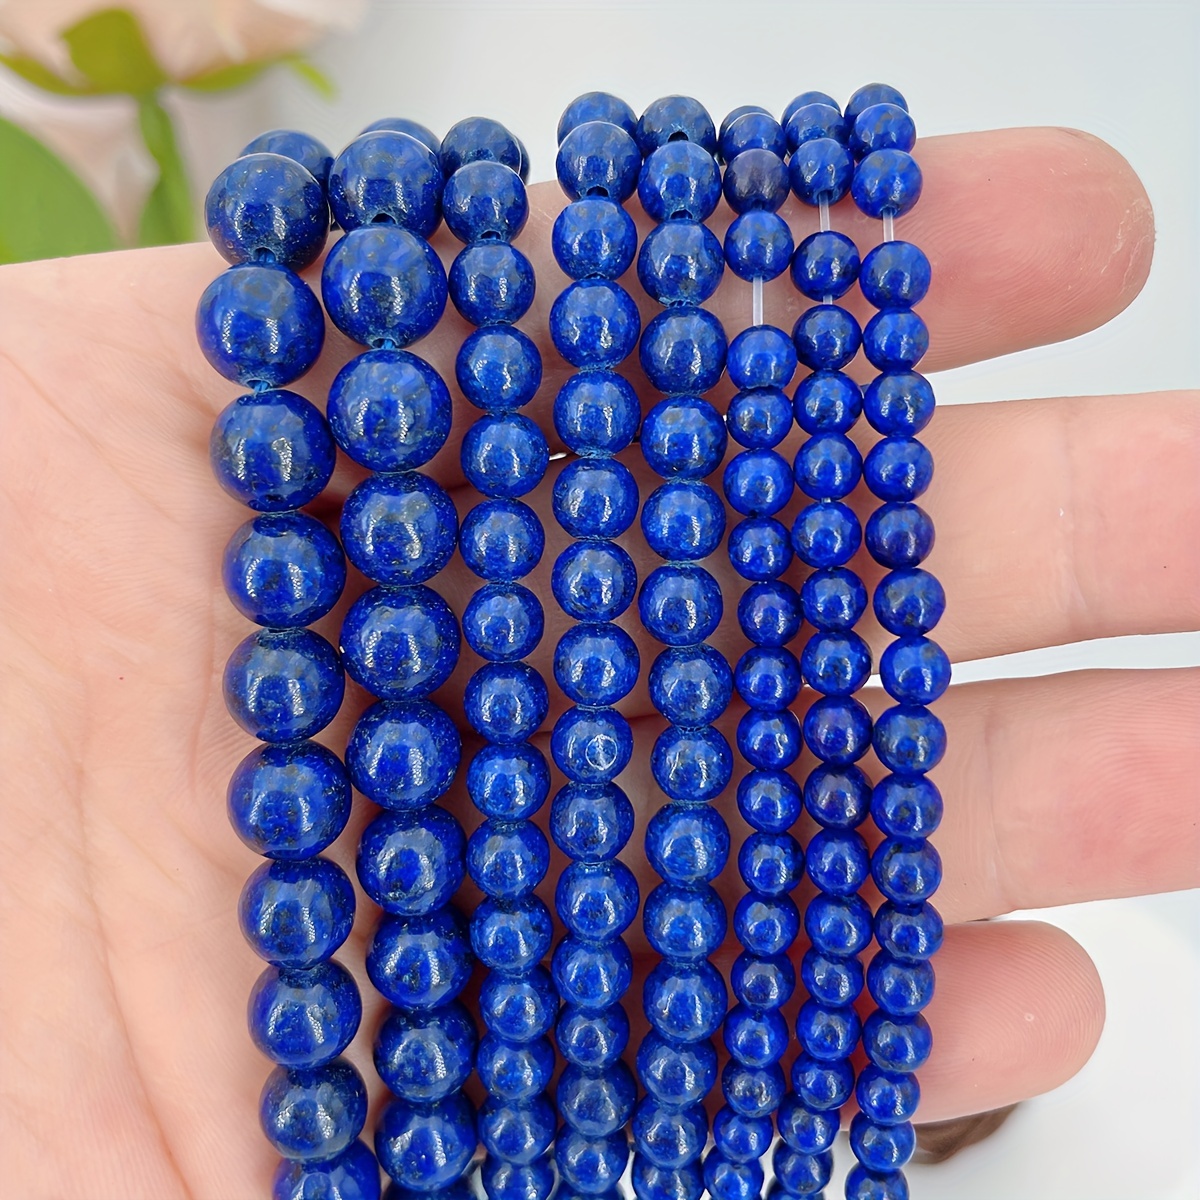 

4/6/8mm Natural Stone "lapis Lazuli" Round Spacer Loose Beads For Jewelry Making Diy Handmade Beaded Men's And Women's Bracelets Earrings Craft Supplies